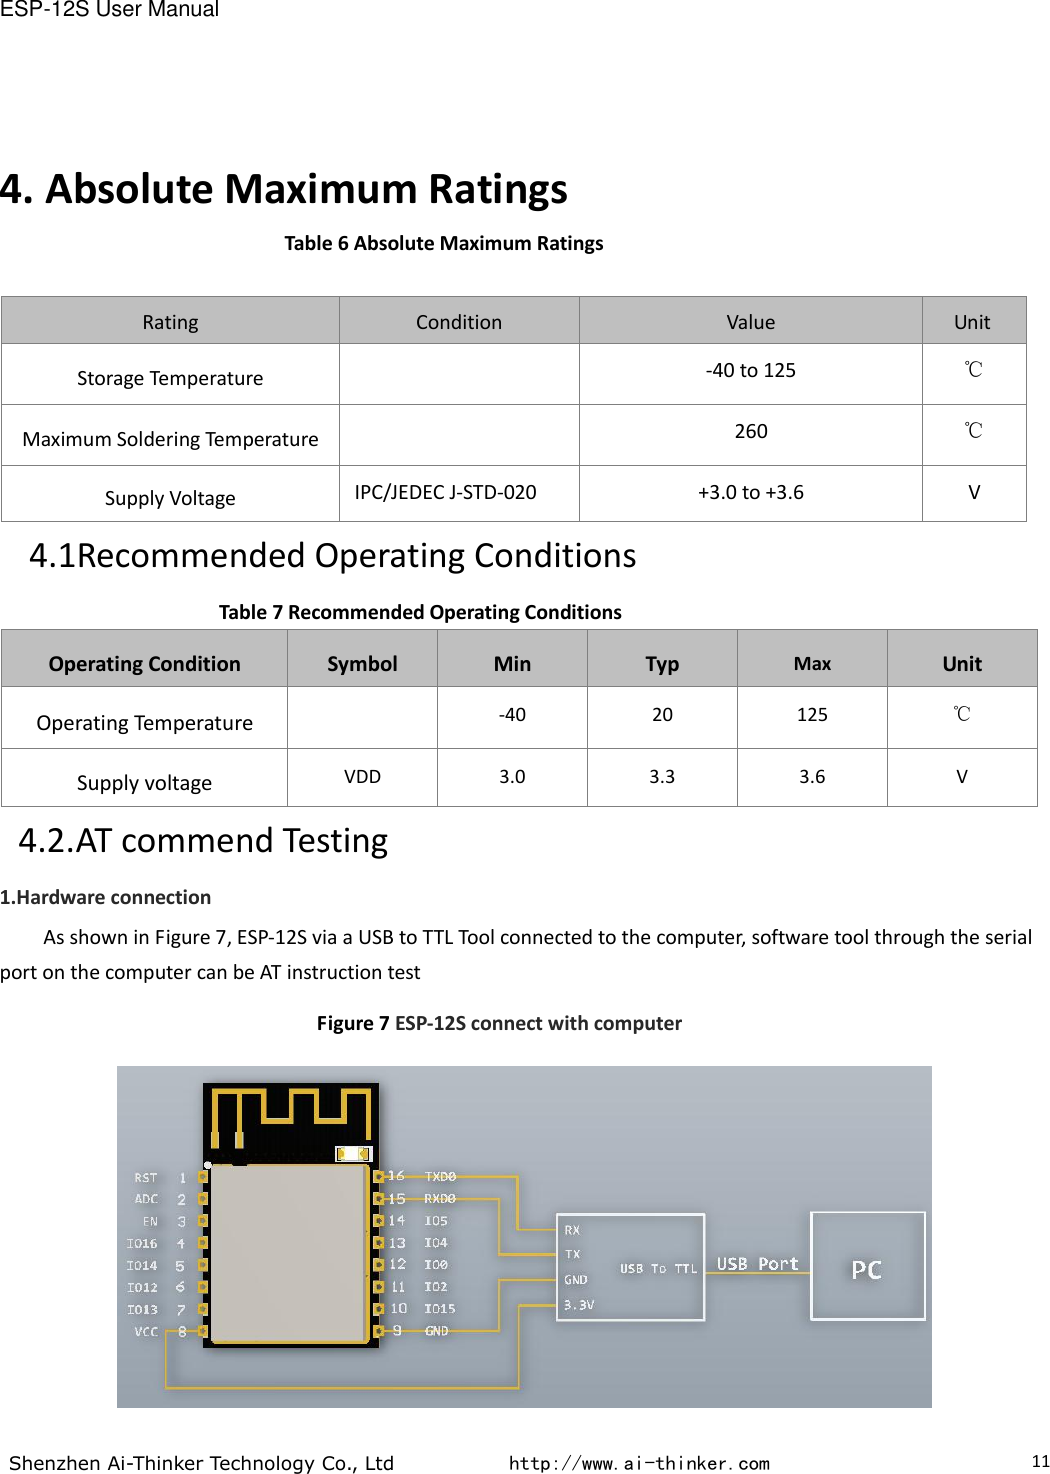 ESP-12S User Manual  Shenzhen Ai-Thinker Technology Co., Ltd           http://www.ai-thinker.com                                                                                     11 4. Absolute Maximum Ratings   Table 6 Absolute Maximum Ratings    Rating Condition Value Unit Storage Temperature  -40 to 125 ℃ Maximum Soldering Temperature  260 ℃ Supply Voltage IPC/JEDEC J-STD-020 +3.0 to +3.6 V 4.1Recommended Operating Conditions   Table 7 Recommended Operating Conditions Operating Condition Symbol Min Typ Max Unit Operating Temperature  -40 20 125 ℃ Supply voltage VDD 3.0 3.3 3.6 V 4.2.AT commend Testing 1.Hardware connection As shown in Figure 7, ESP-12S via a USB to TTL Tool connected to the computer, software tool through the serial port on the computer can be AT instruction test Figure 7 ESP-12S connect with computer  